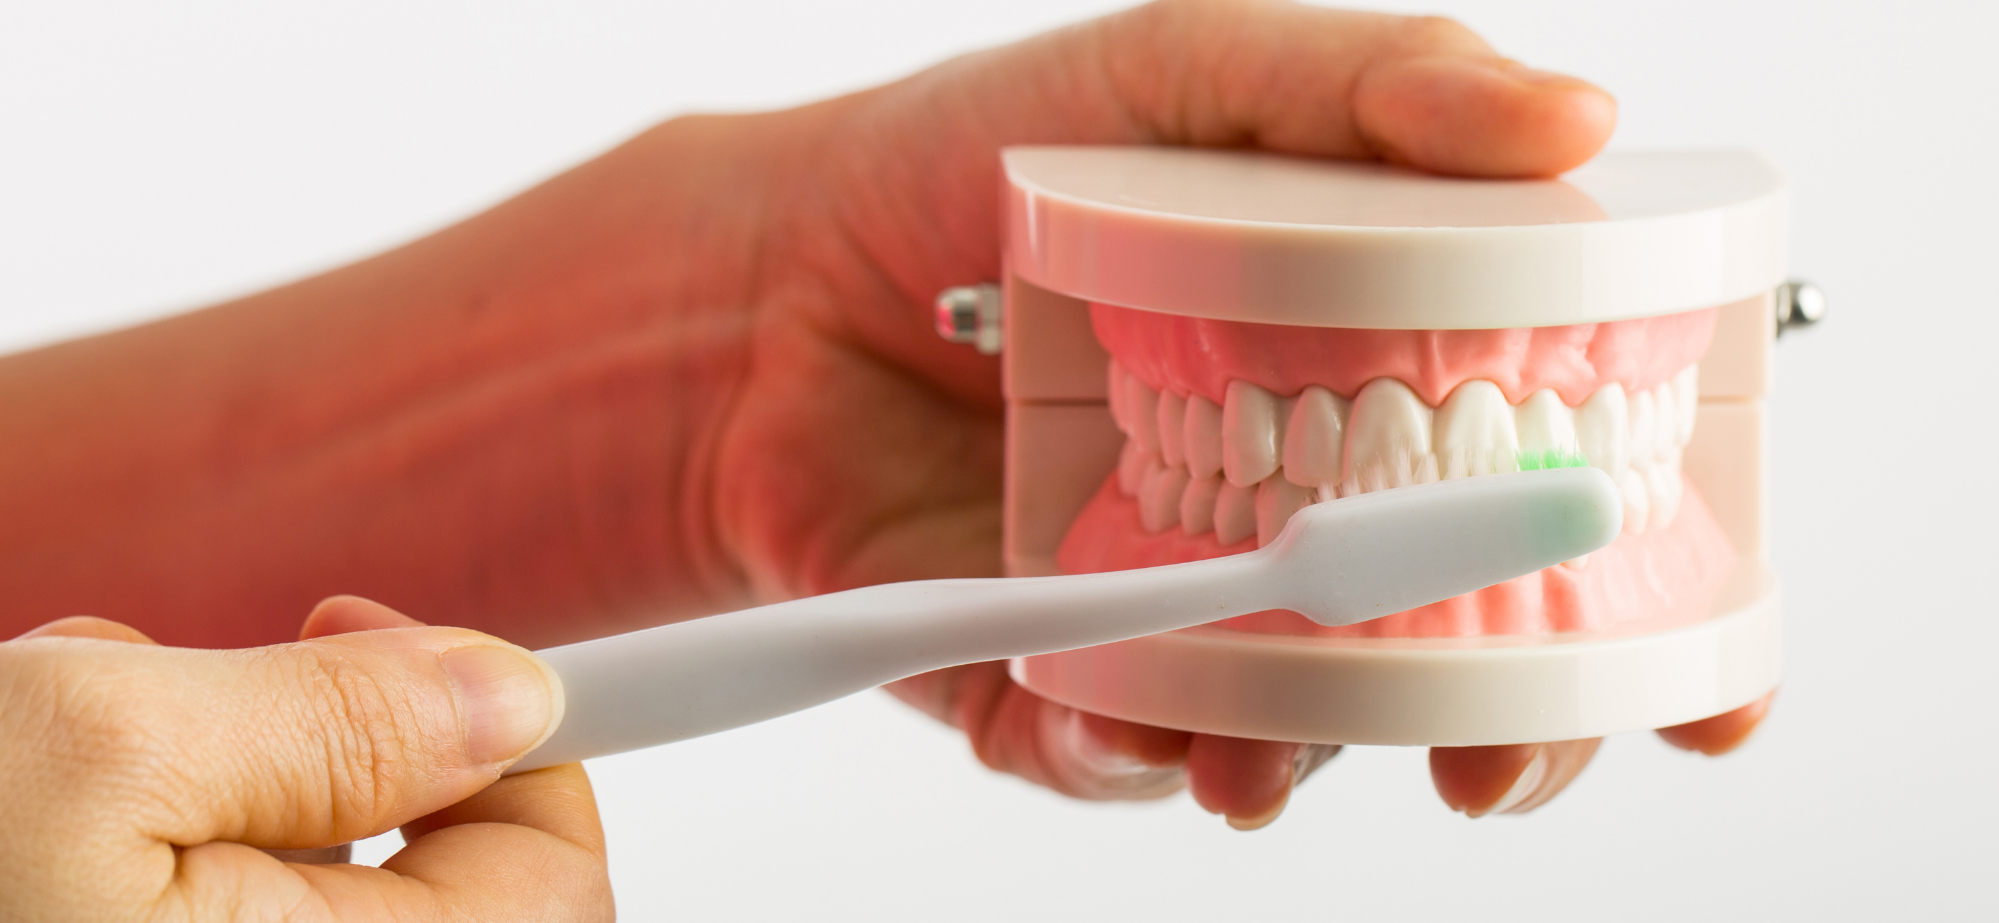 How to care for dental implants